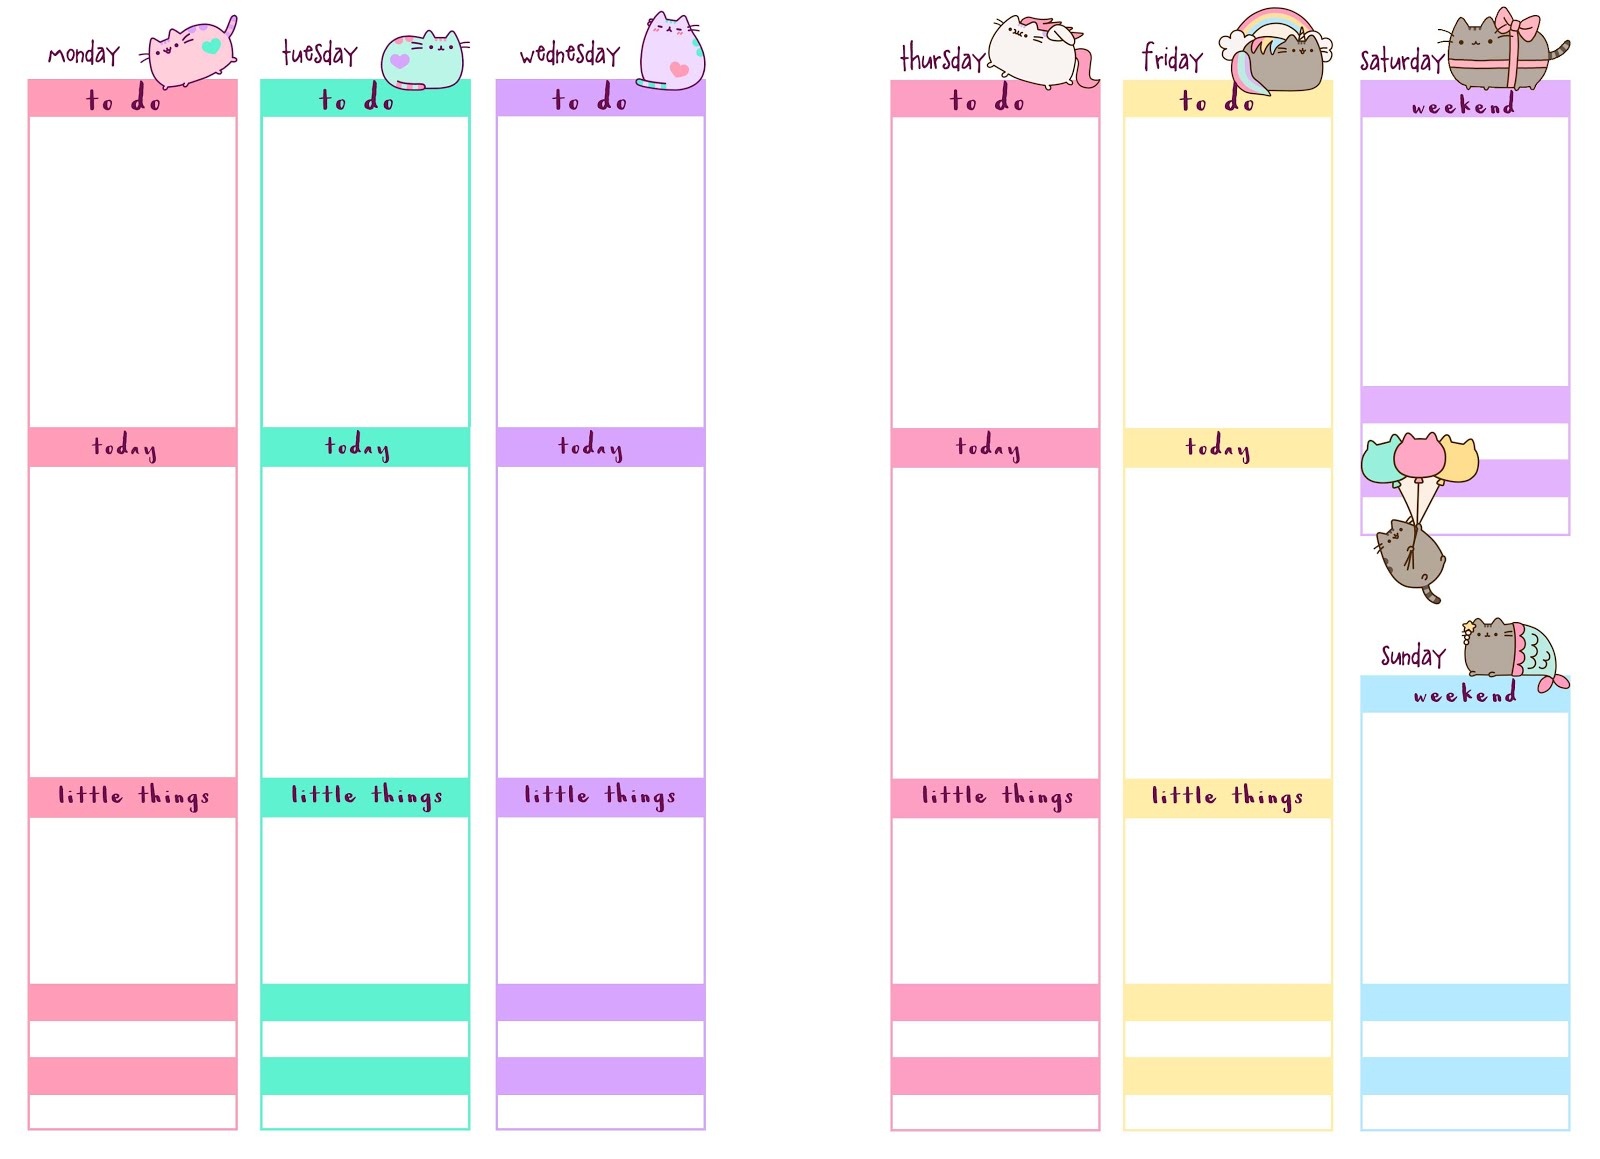 Pb And J Studio: Free Printable Planner Inserts | Pusheen Inspired - Free Printable Diary Pages